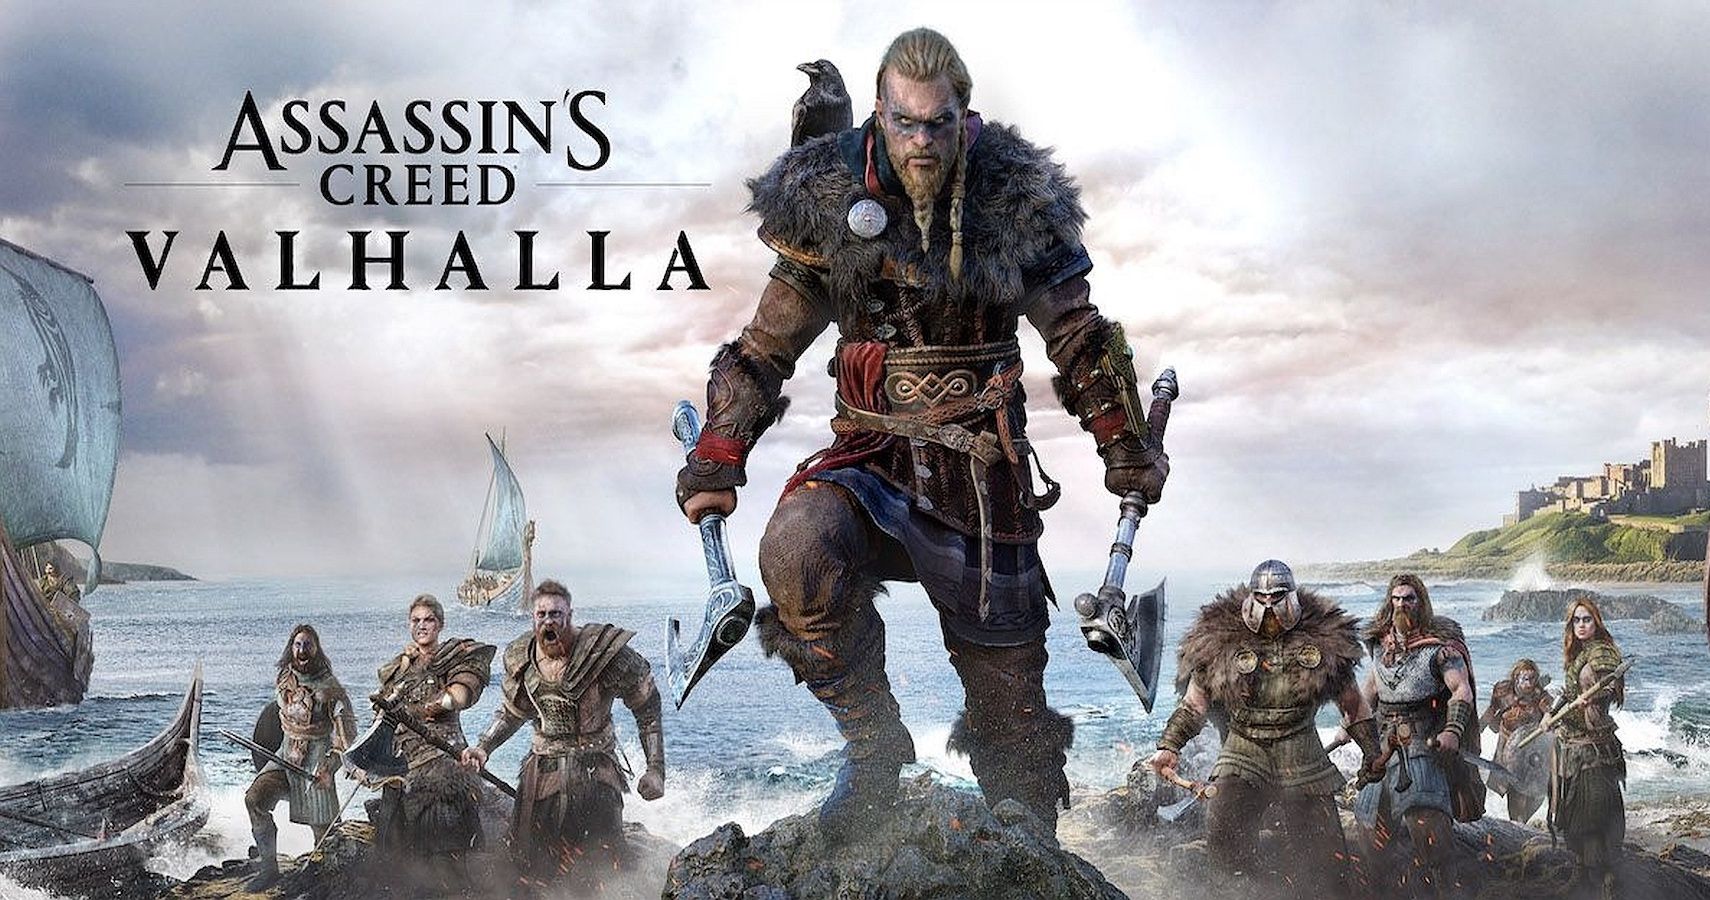 Assassin's Creed Valhalla: The Nordic and English history you need